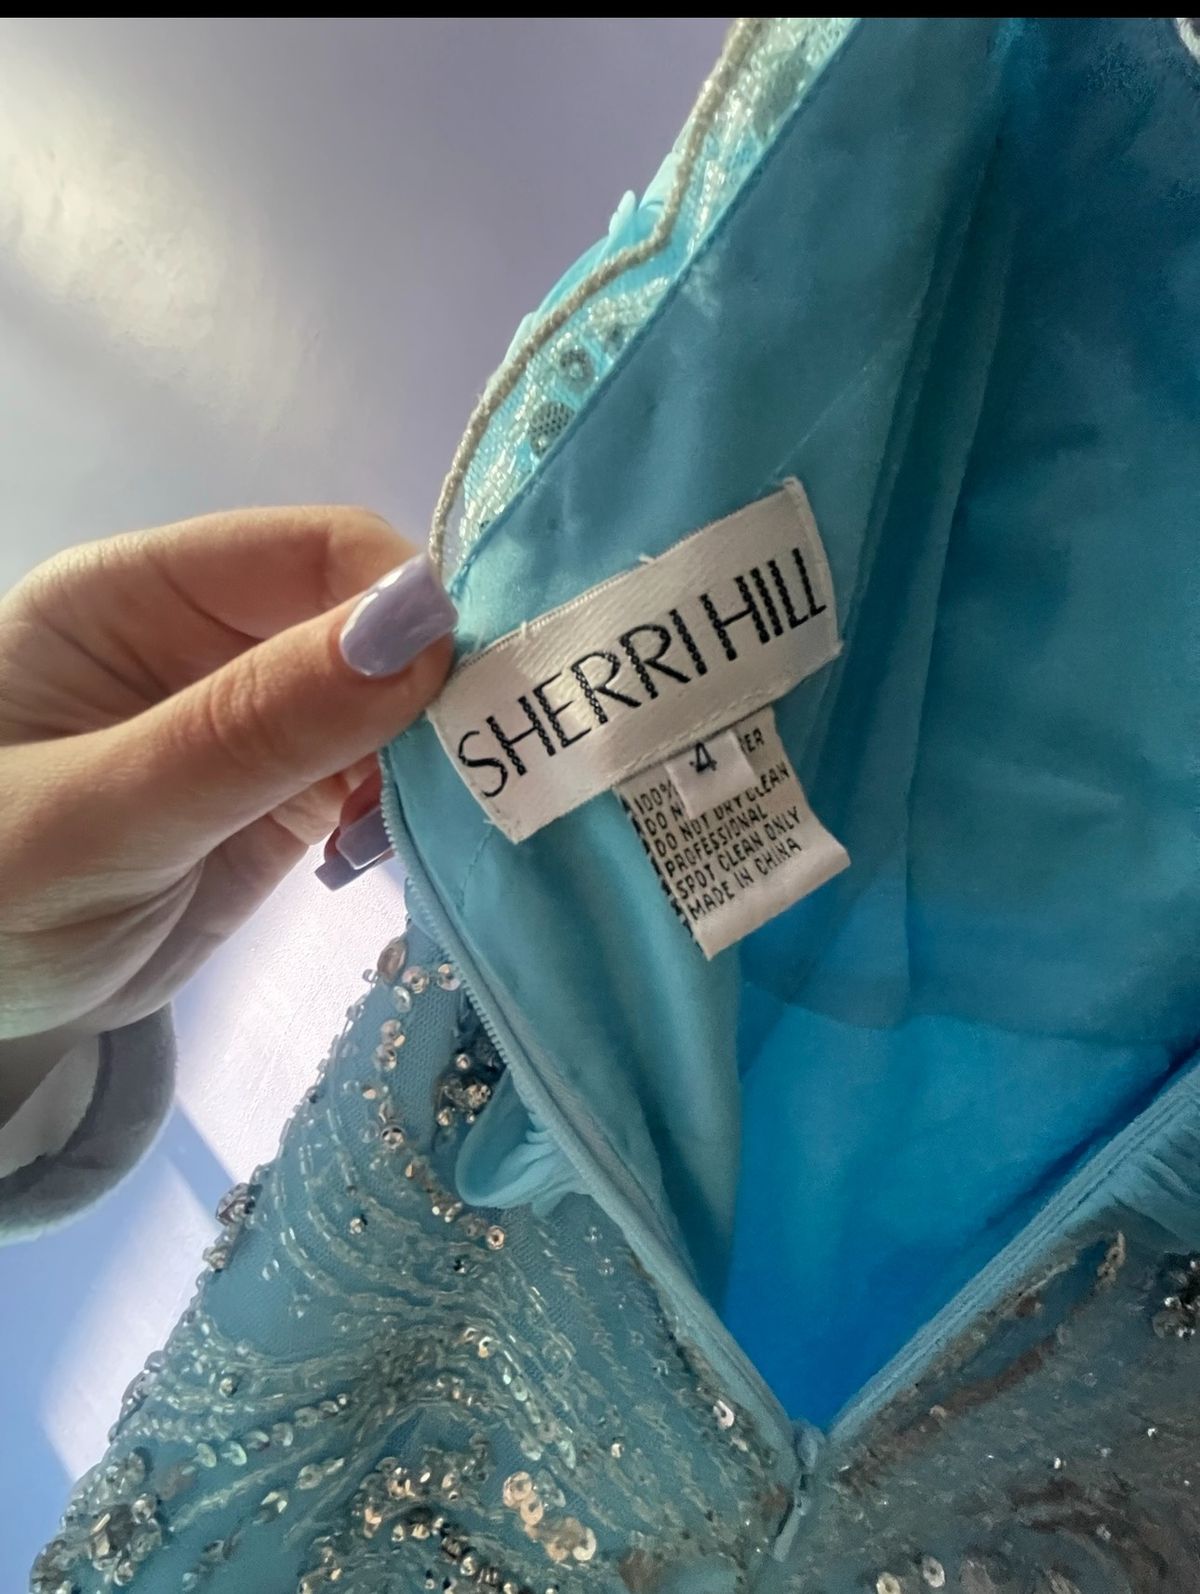 Style 21036 Sherri Hill Size 4 Prom Cap Sleeve Sequined Light Blue Mermaid Dress on Queenly